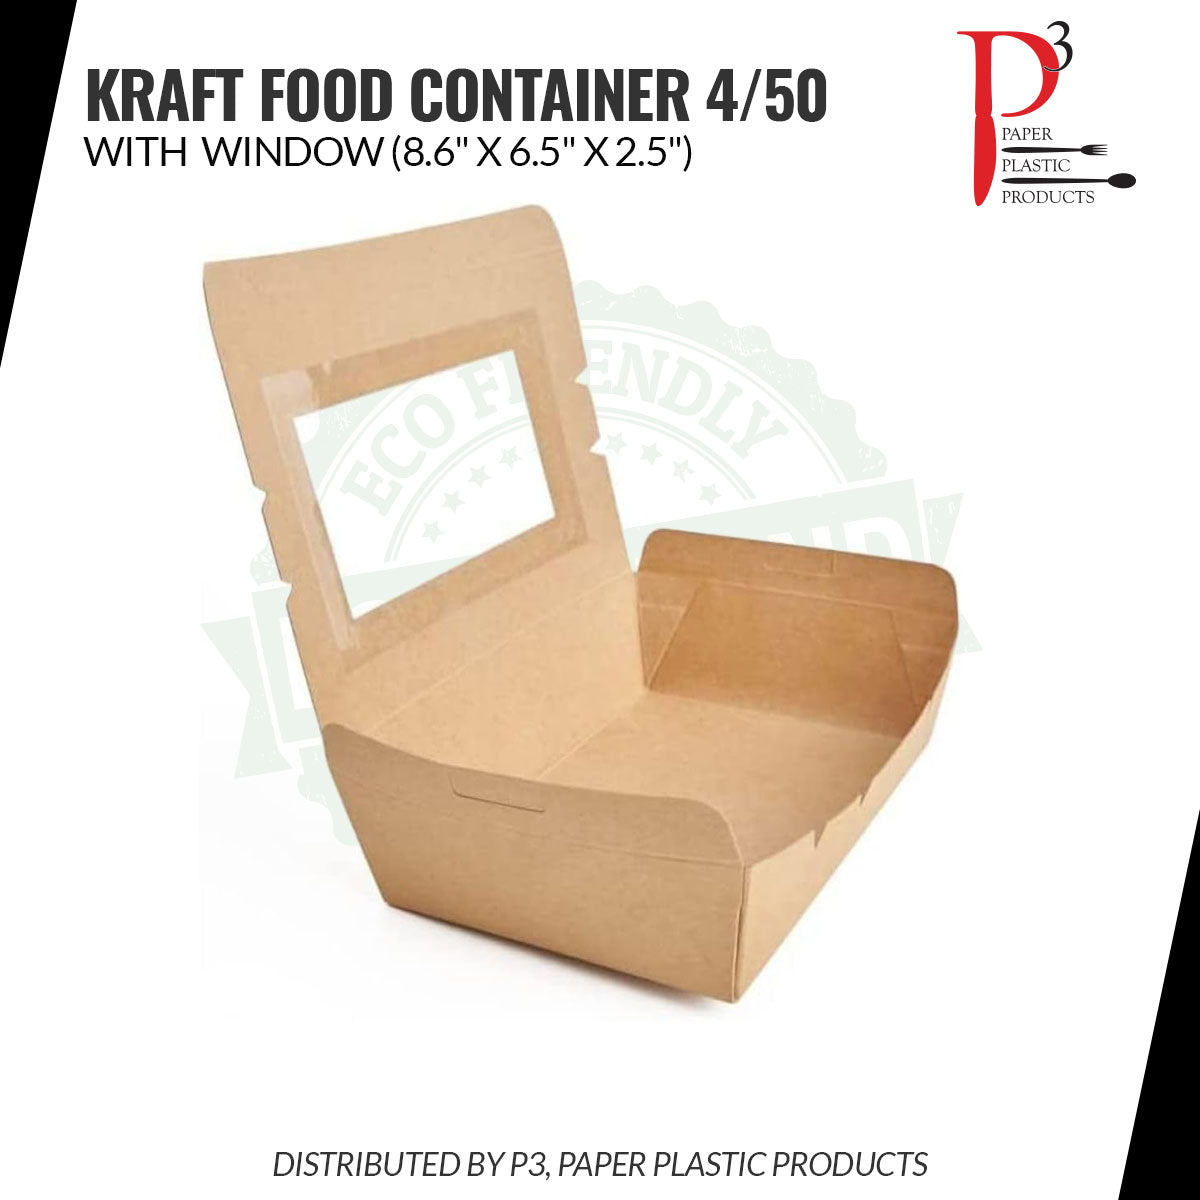 Kraft Food Container with window 8.6" x 6.5" x 2.5" 4/50